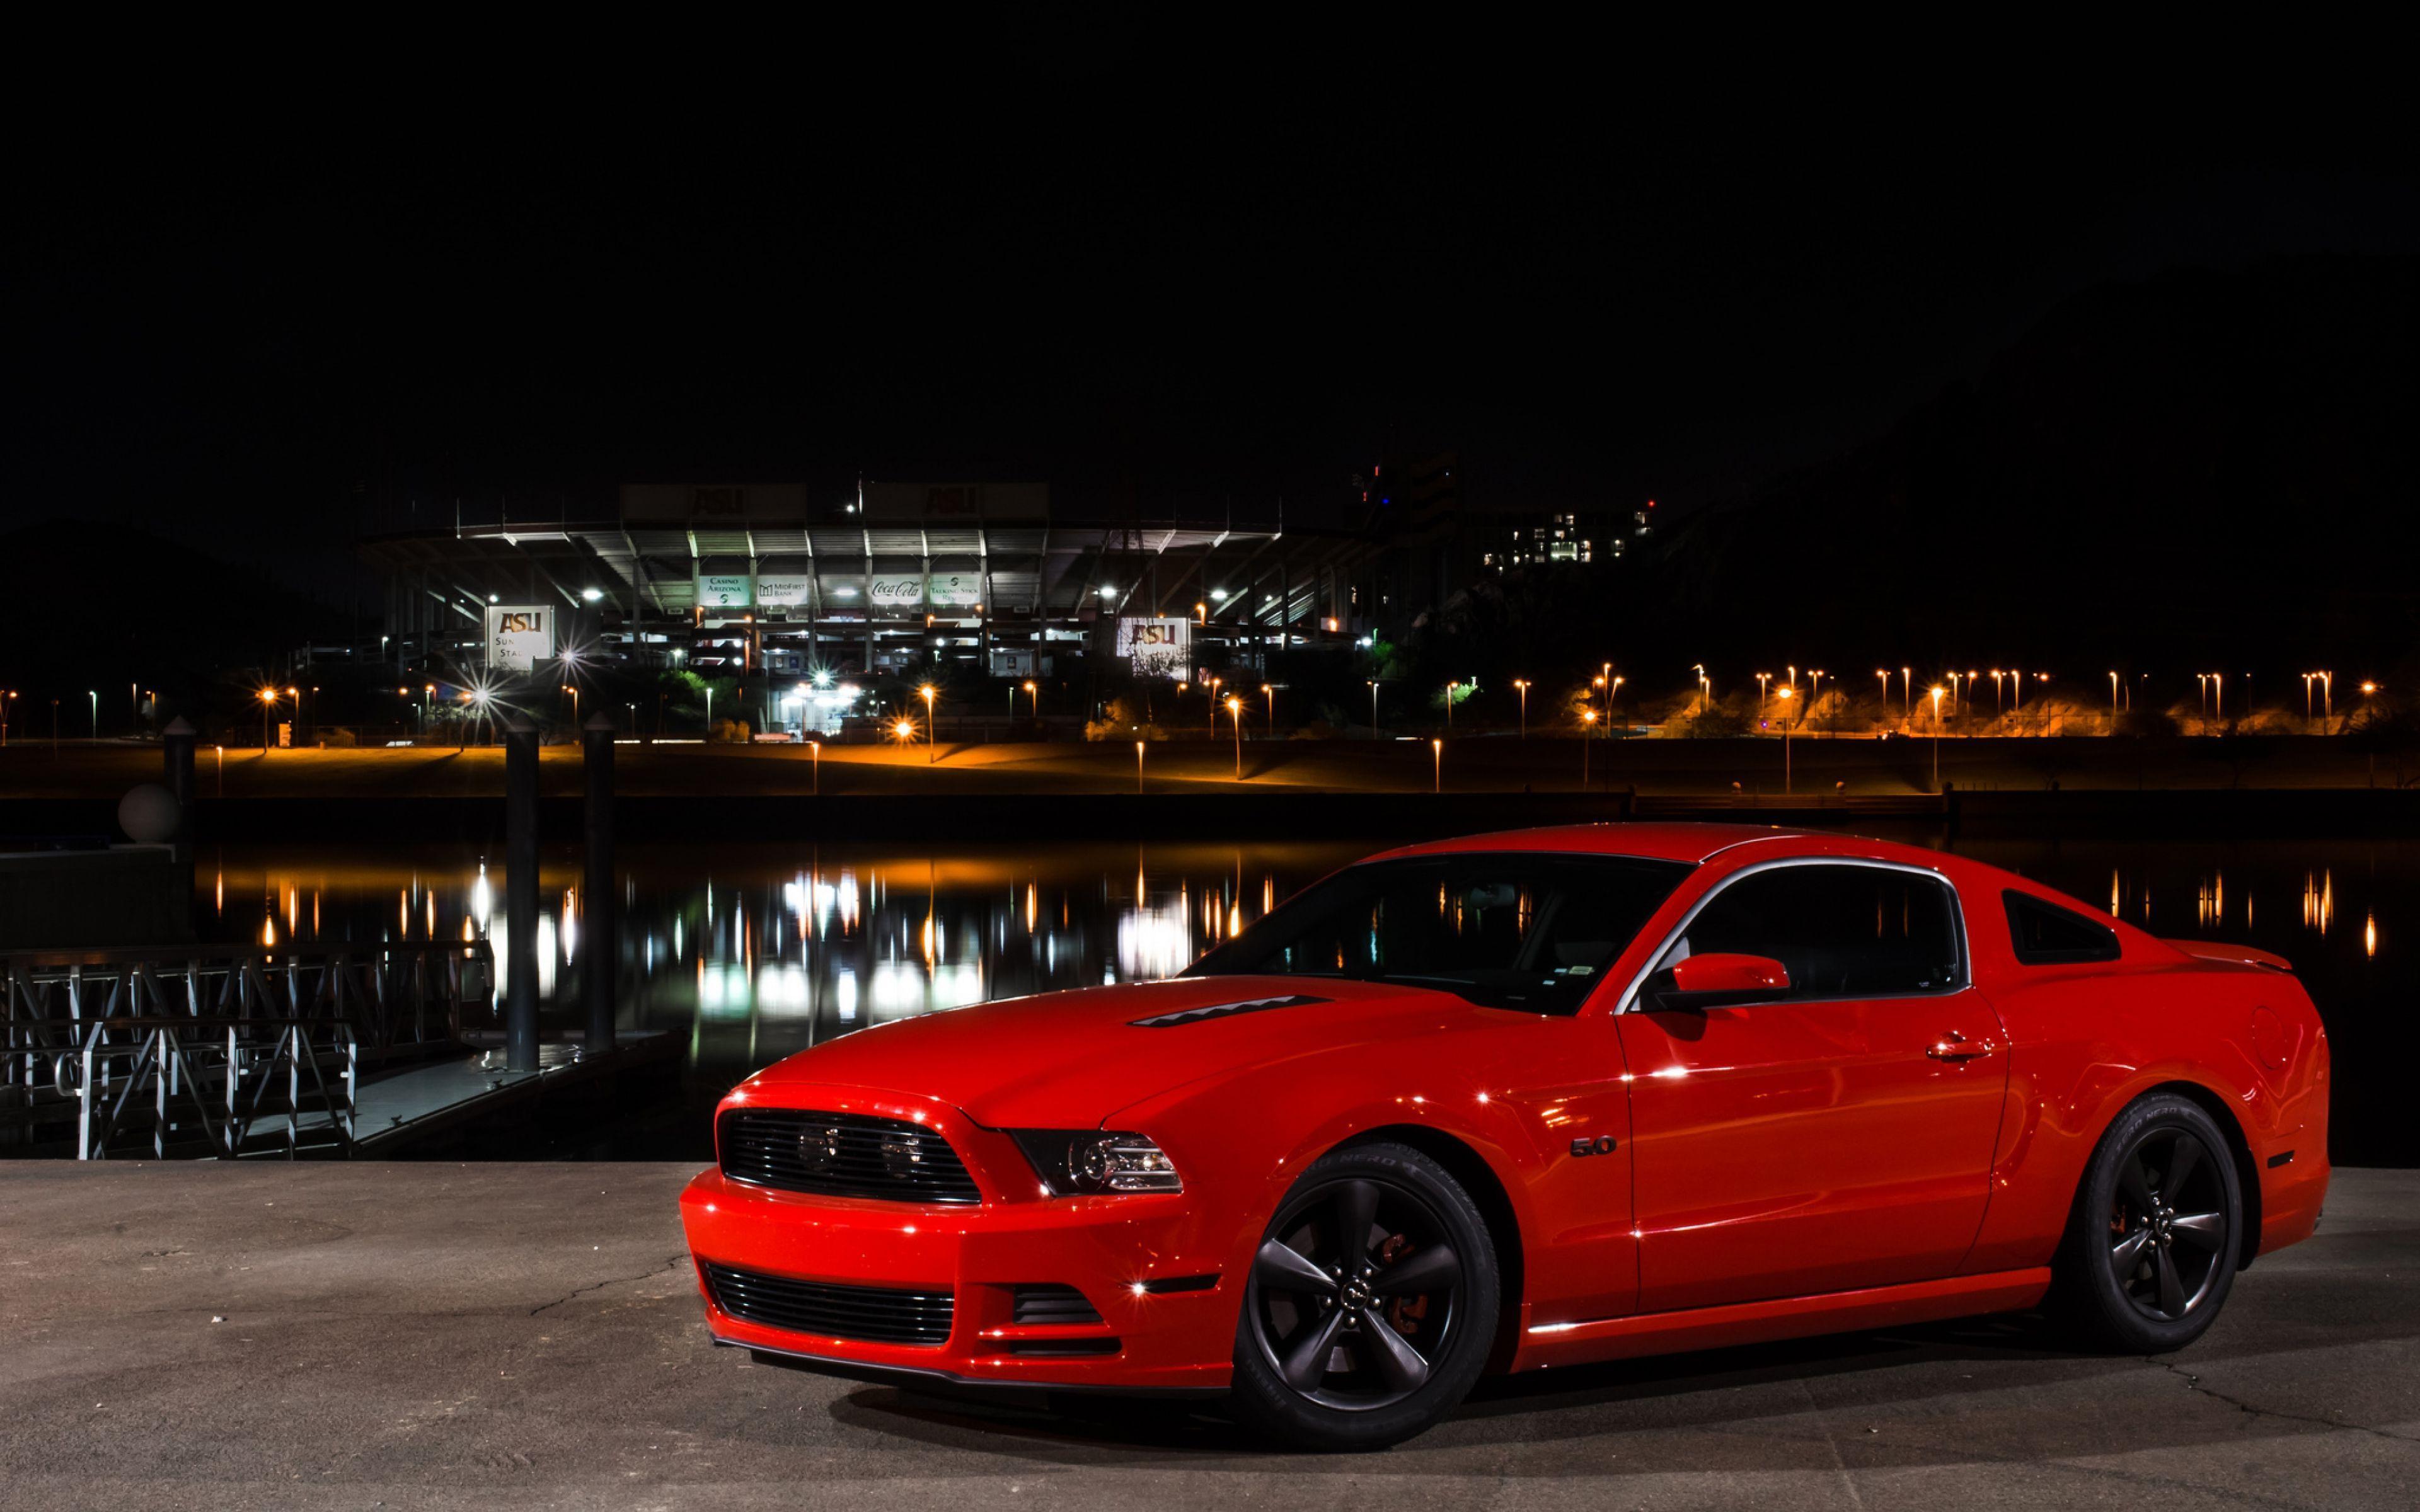 Red Ford Mustang Wallpapers Top Free Red Ford Mustang Backgrounds Wallpaperaccess